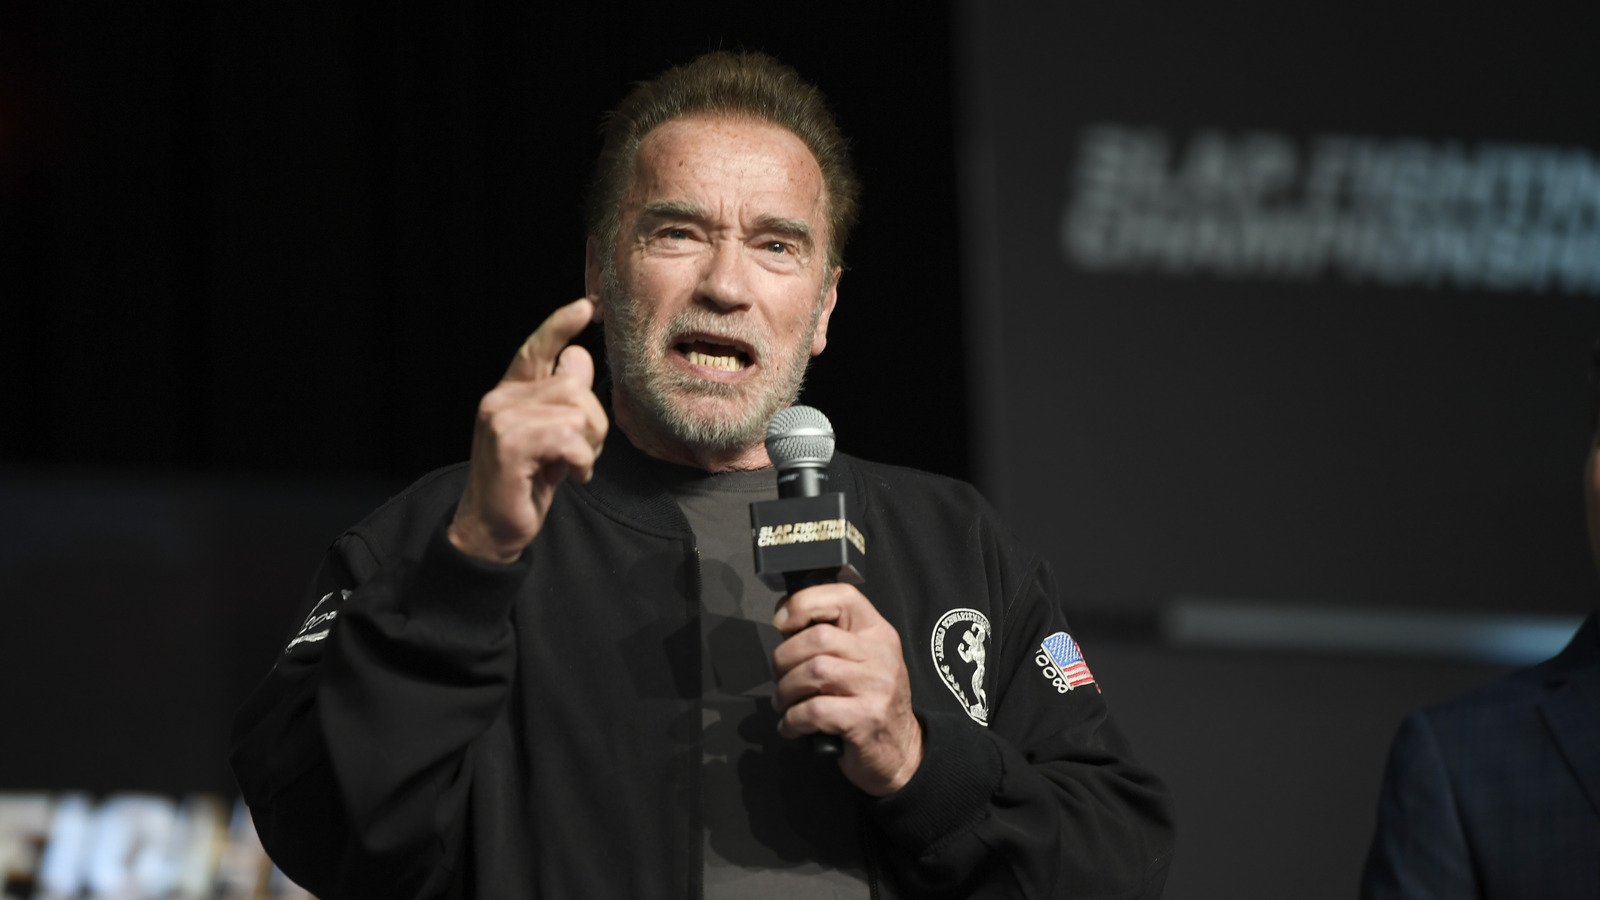 The Top 5 Most Expensive Vehicles Owned By Arnold Schwarzenegger – SlashGear